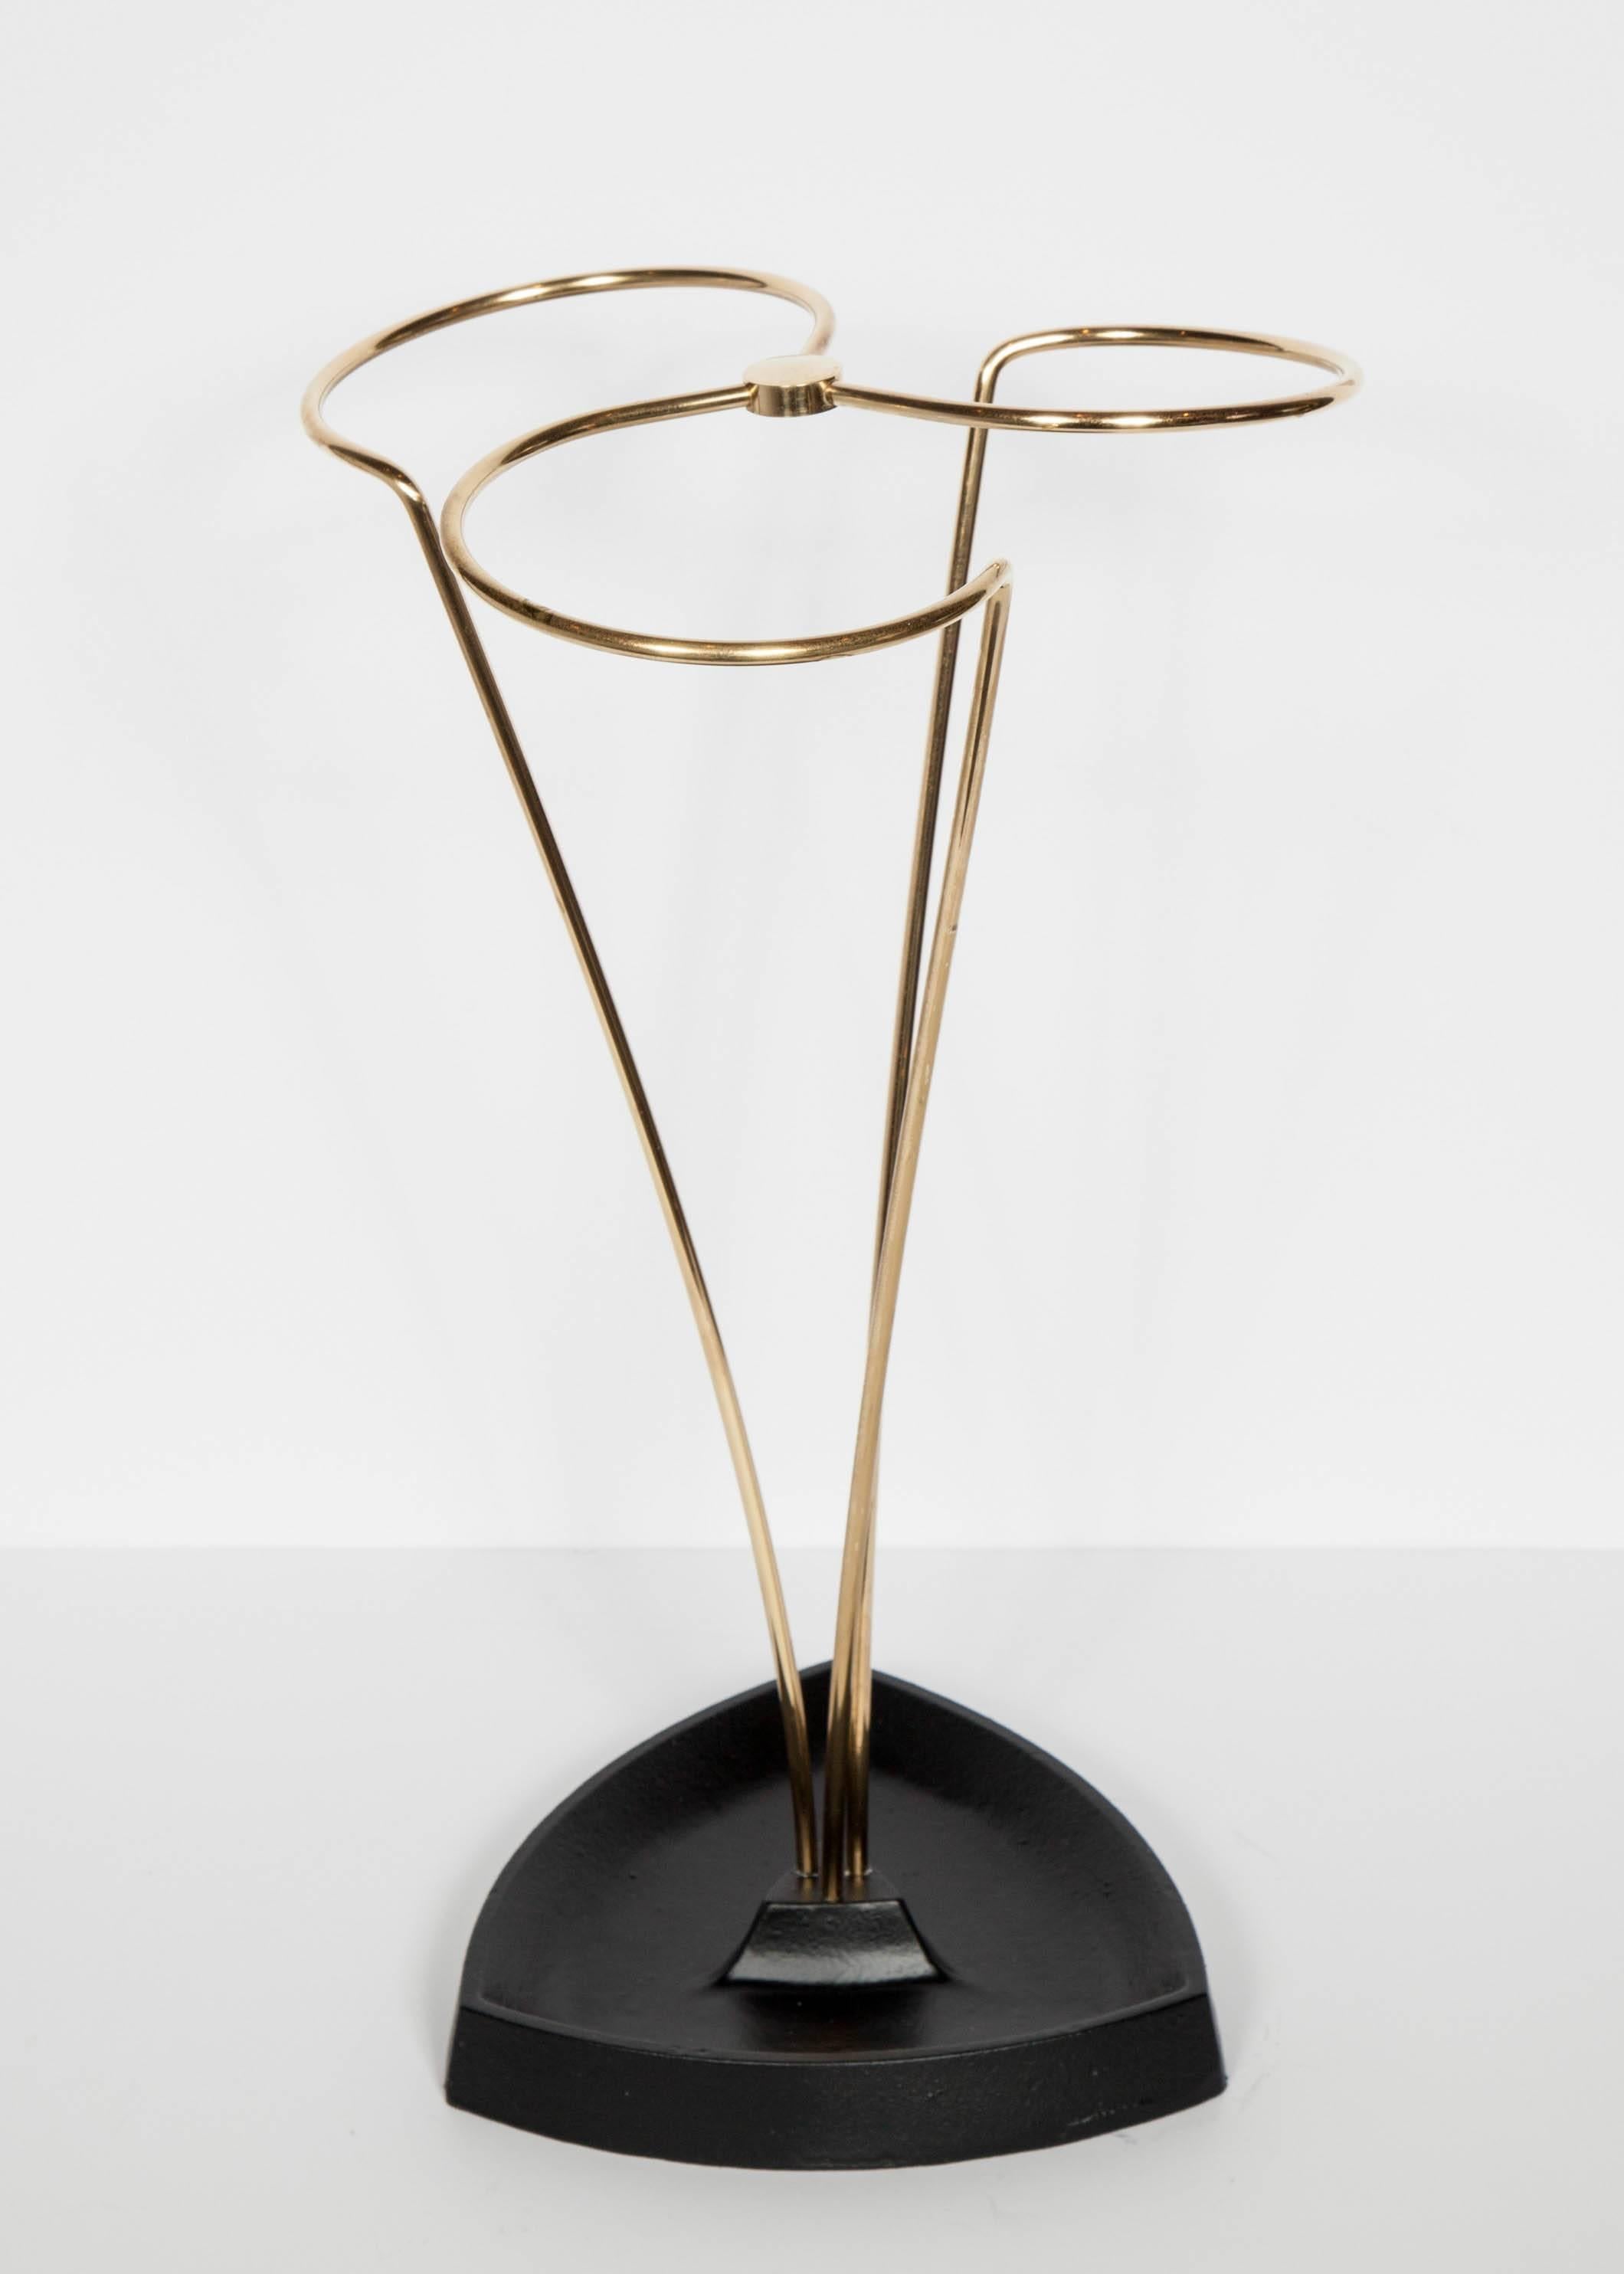 Enameled Mid-Century Modern Umbrella Stand in the Manner of Carl Auböck